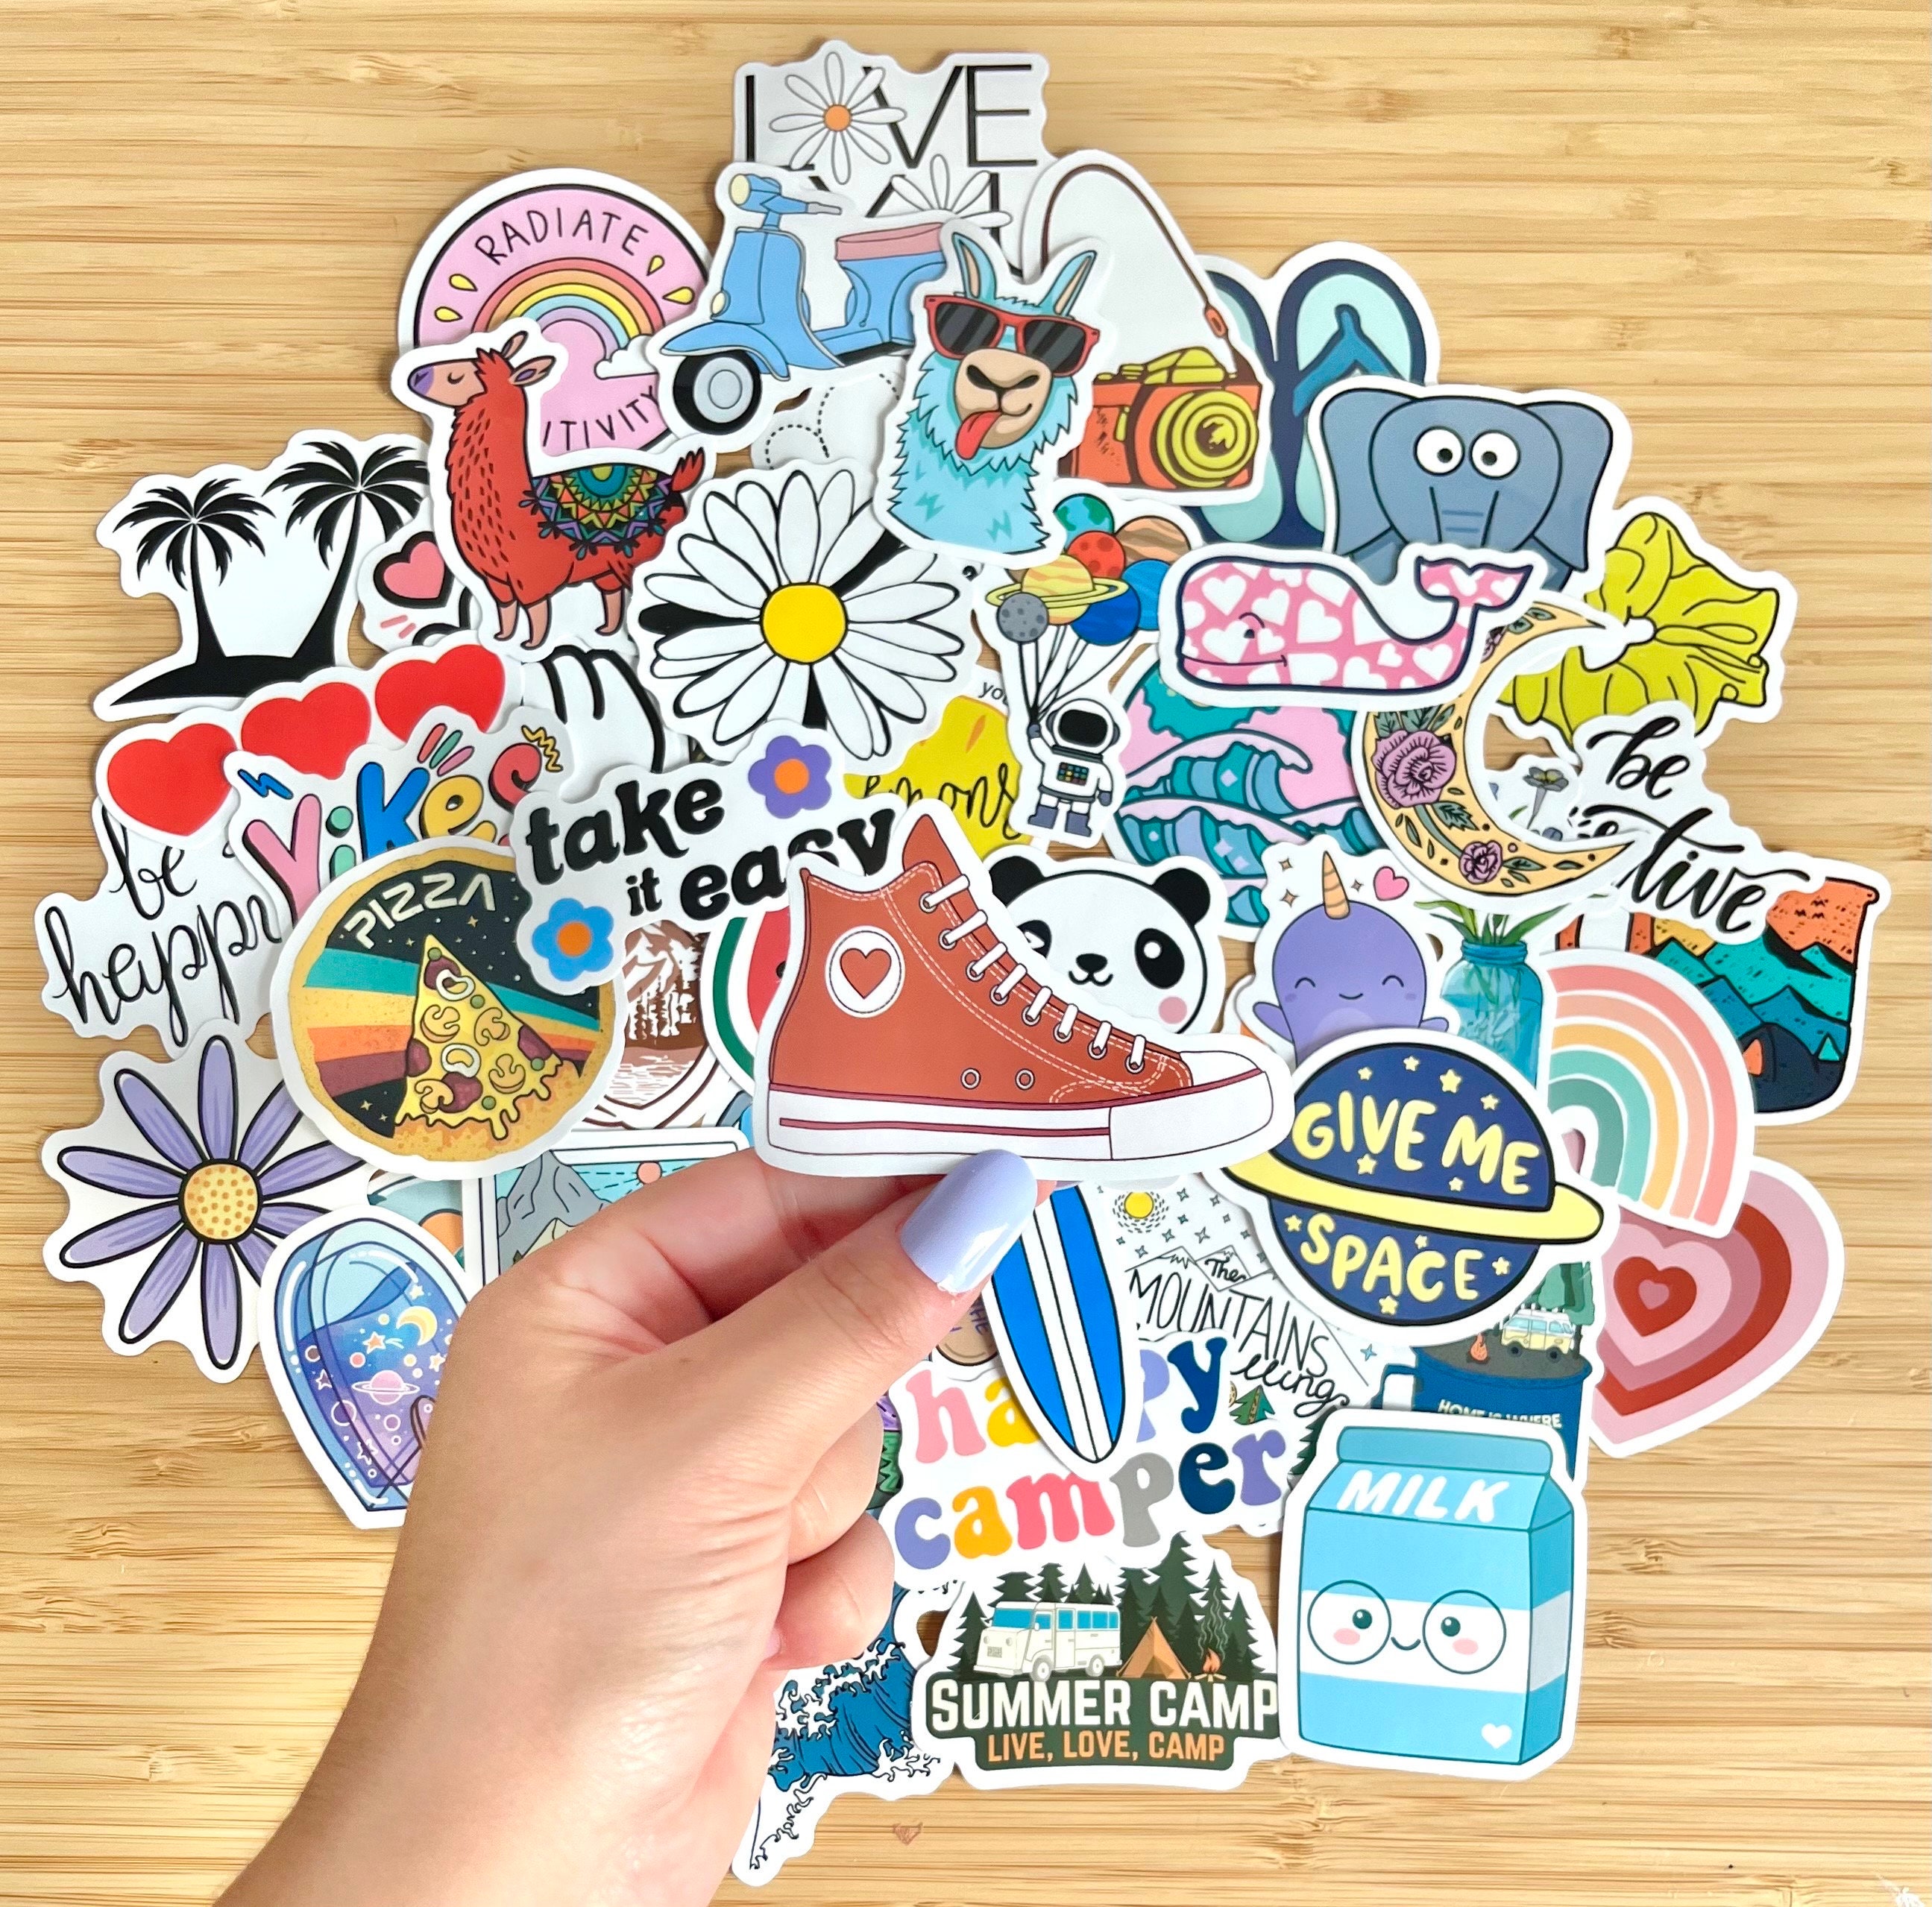 Random Sticker Pack Funny Memes, Brands, Logos, Cartoons, Limited Edition  Planner Stickers Waterproof Laptop Stickers 10 Stickers 